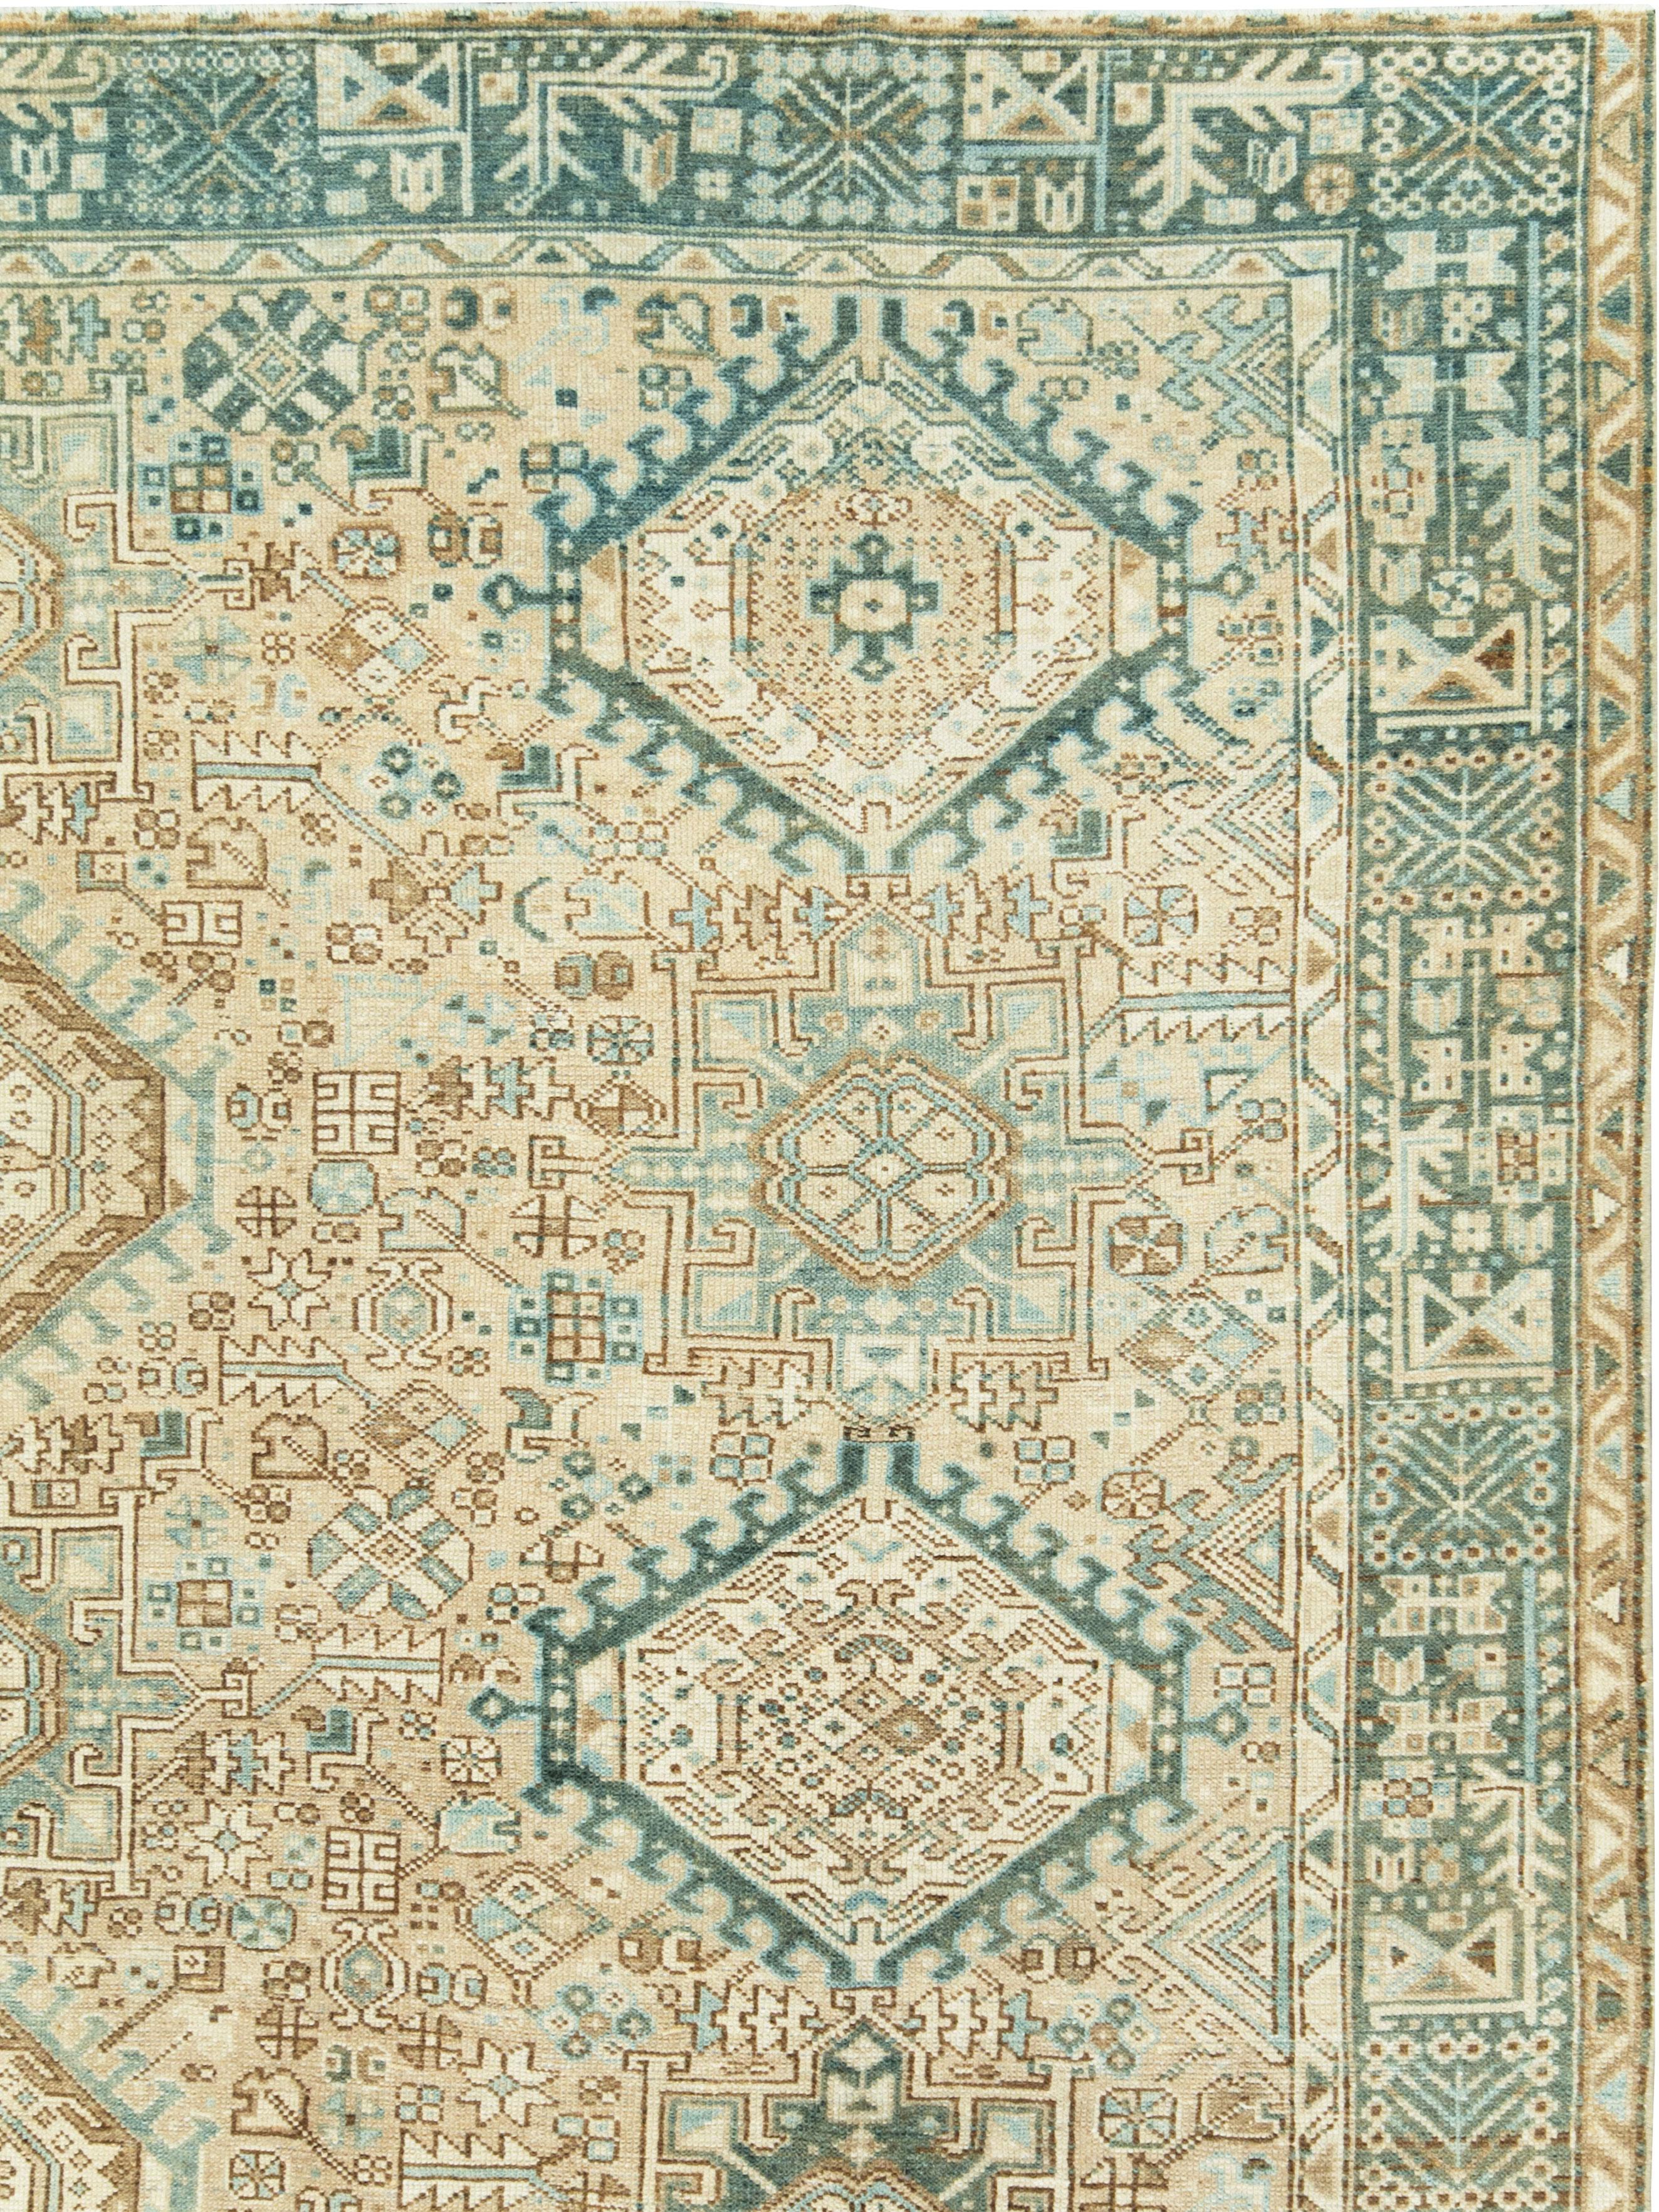 Hand-Knotted Mid-Century Persian Room Size Carpet With A Tribal Design In Teal and Sand Color